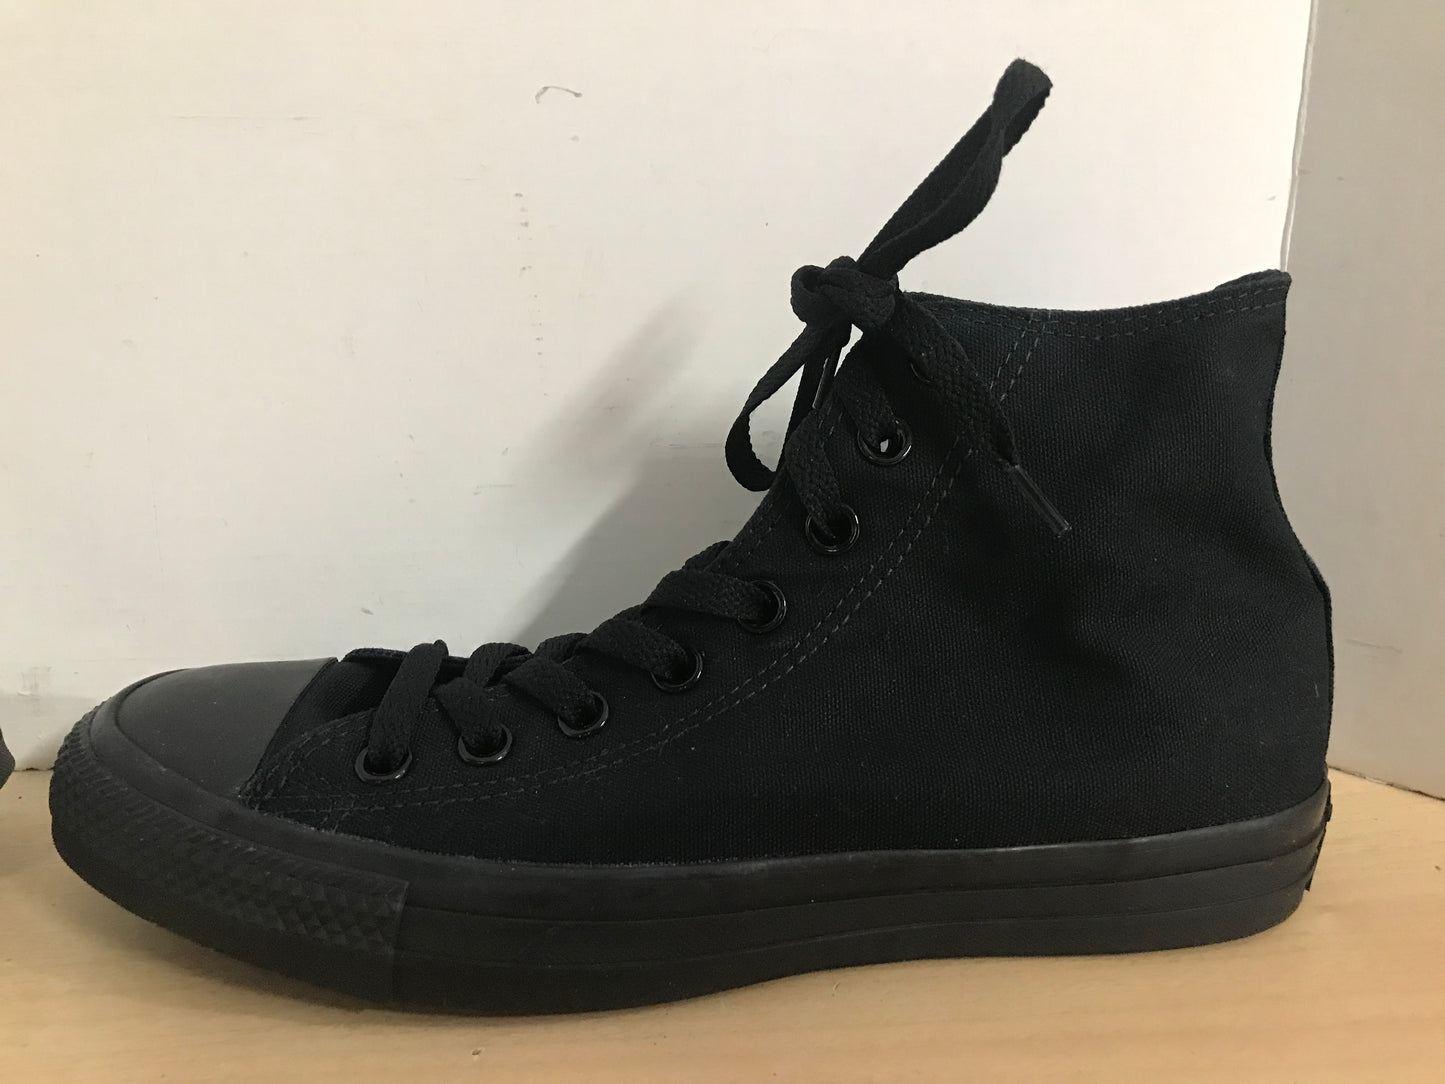 Runners Men's Size 7 Ladies Size 8.5 Converse Sneakers Black Cotton High Top New Demo Model